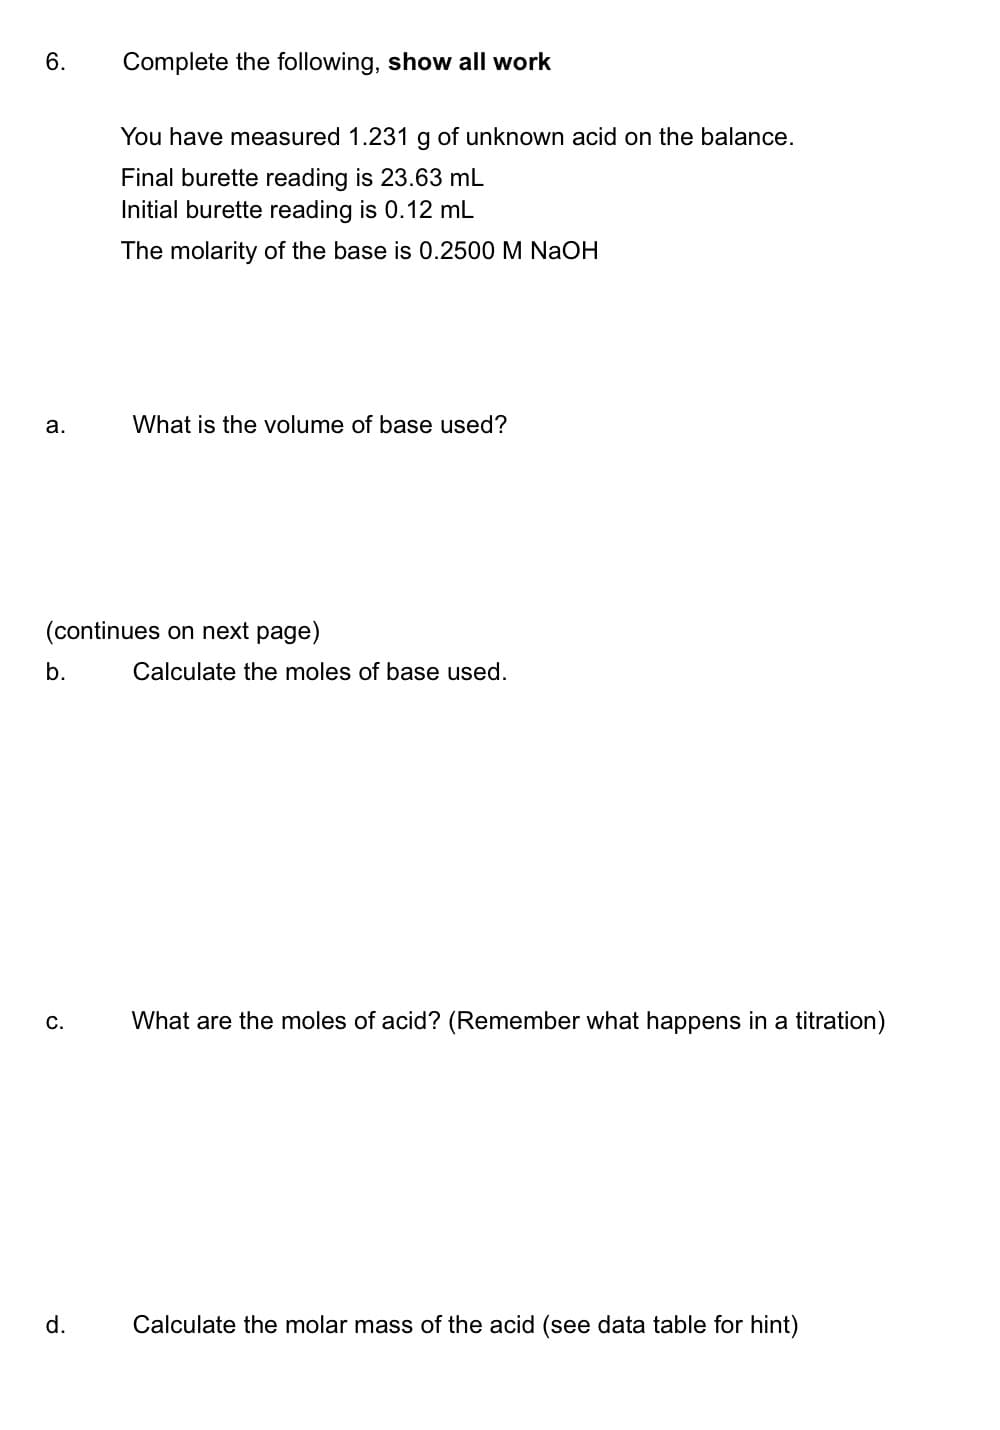 6.
Complete the following, show all work
You have measured 1.231 g of unknown acid on the balance.
Final burette reading is 23.63 mL
Initial burette reading is 0.12 mL
The molarity of the base is 0.2500 M NaOH
а.
What is the volume of base used?
(continues on next page)
b.
Calculate the moles of base used.
С.
What are the moles of acid? (Remember what happens in a titration)
d.
Calculate the molar mass of the acid (see data table for hint)
